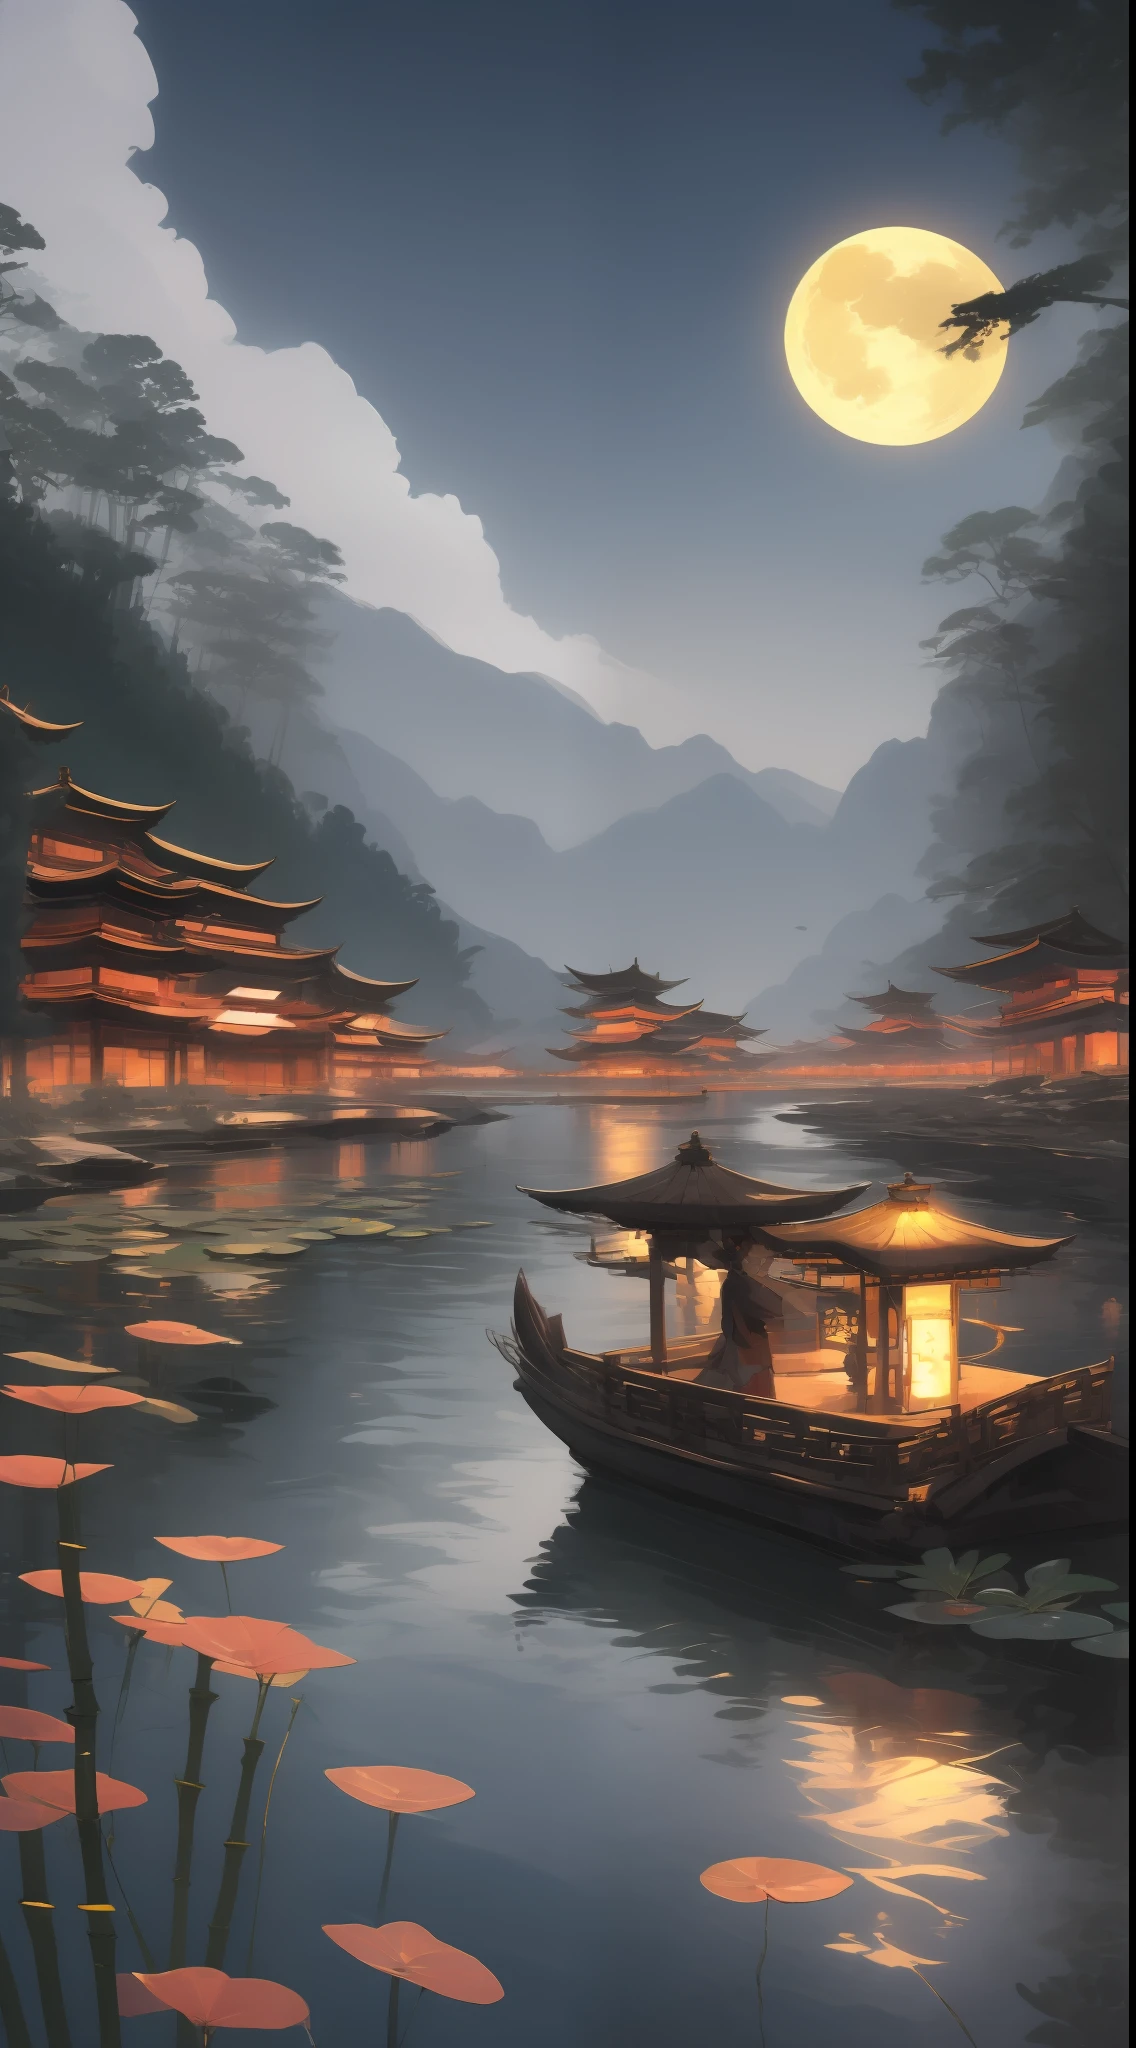 masterpiece, best quality, Chinese martial arts style, an Asian night scene with lanterns and water lilies, Asian lagoon with lanterns and boats night scene with many lights and boats on the water, lake surface, lotus flowers, beautiful night scene, ((Chinese martial arts style)))), with vast sky, continuous mountains and steep cliffs, inkwashing style,  contour light, atmospheric atmosphere, depth of field, rising mist, bamboo, pine trees, octagonal stone pavilion, waterfall running water, large full moon, (No color), Monochrome, light color,